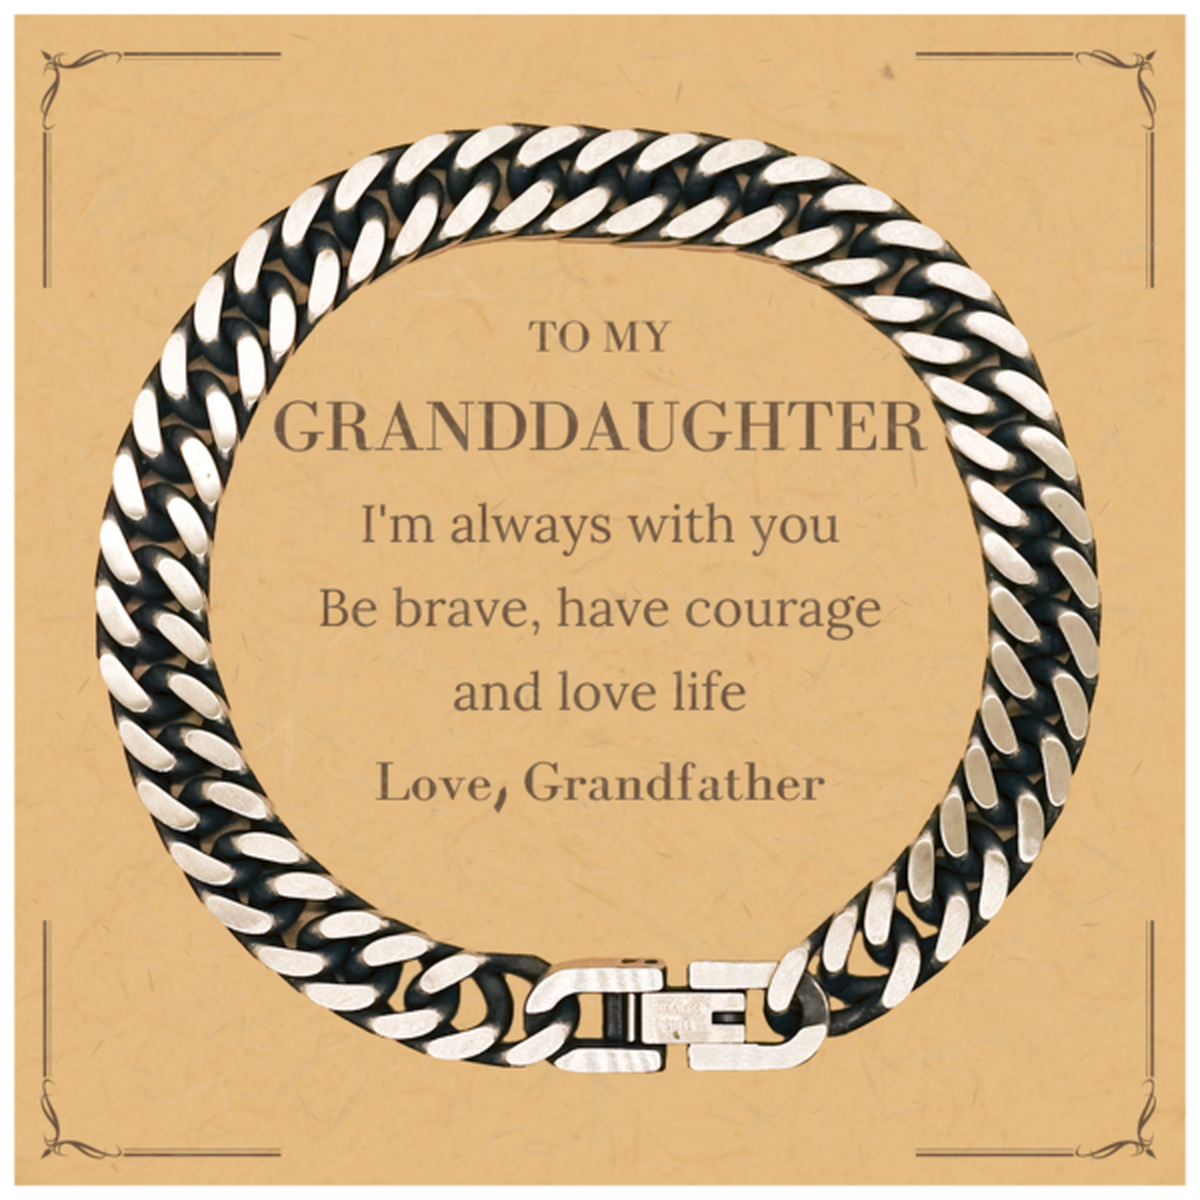 To My Granddaughter Gifts from Grandfather, Unique Cuban Link Chain Bracelet Inspirational Christmas Birthday Graduation Gifts for Granddaughter I'm always with you. Be brave, have courage and love life. Love, Grandfather